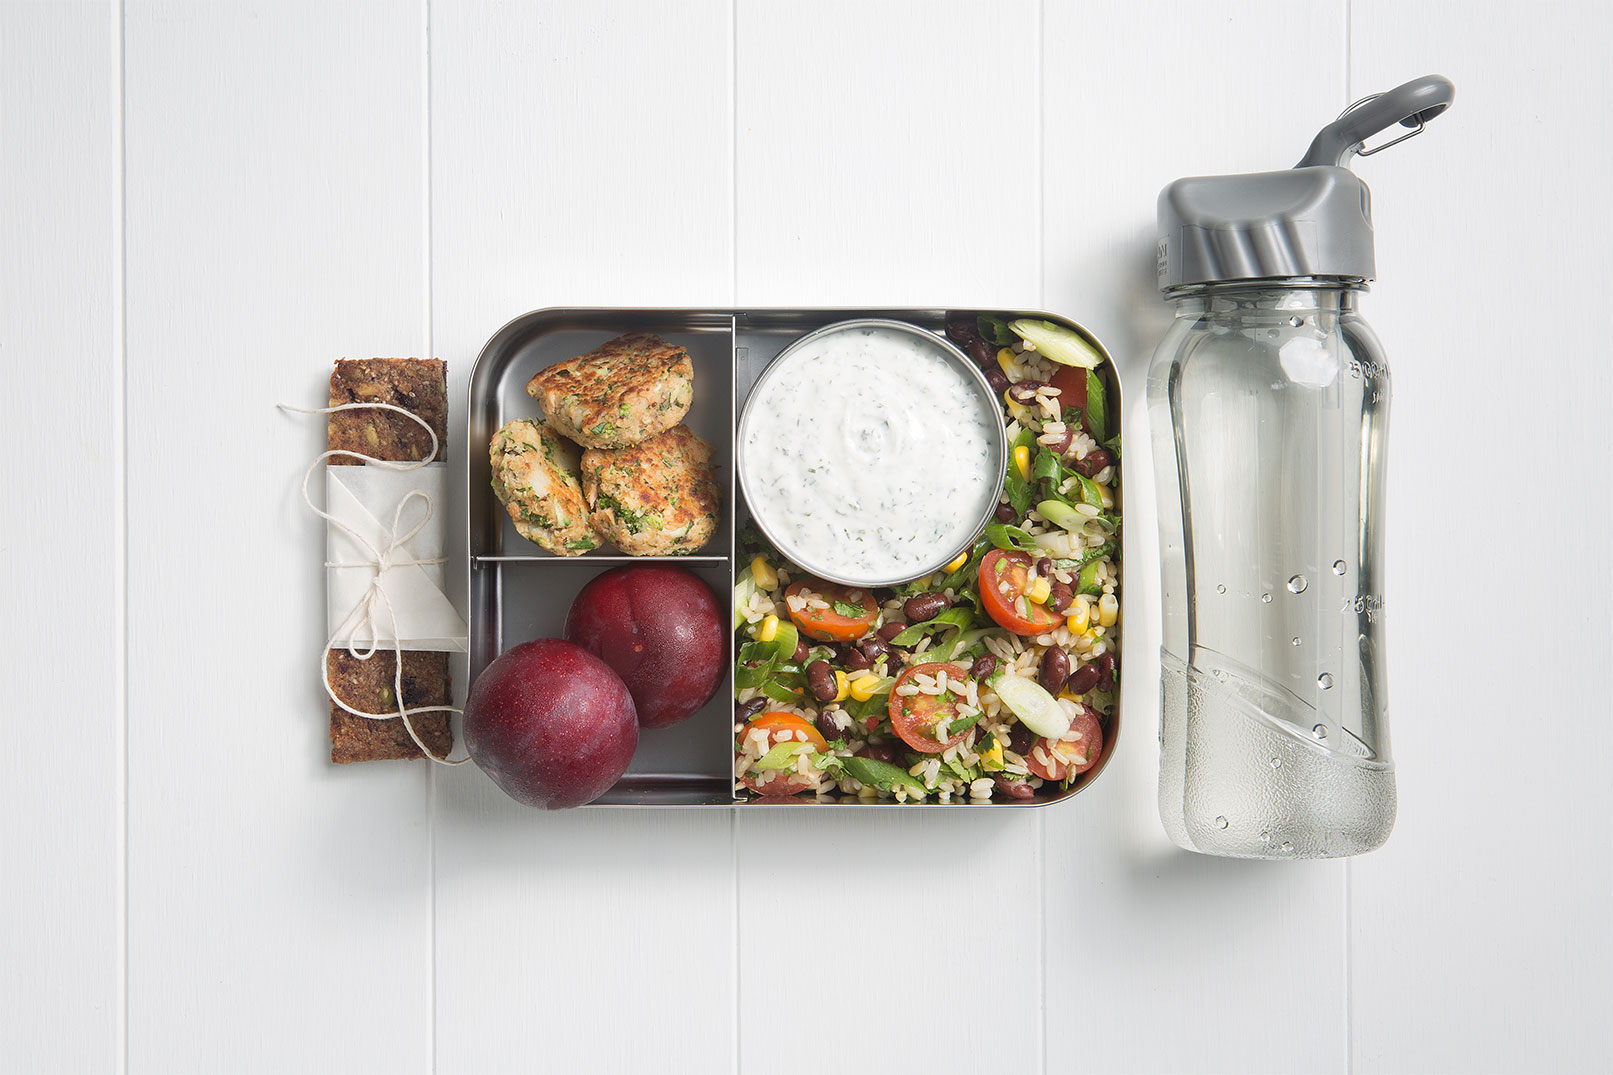 Image of a packed lunch box with zucchini and turmeric salmon patties, rice salad, minty yoghurt dip, two plums, chewy fruit and seed bar and a bottle of water on the side